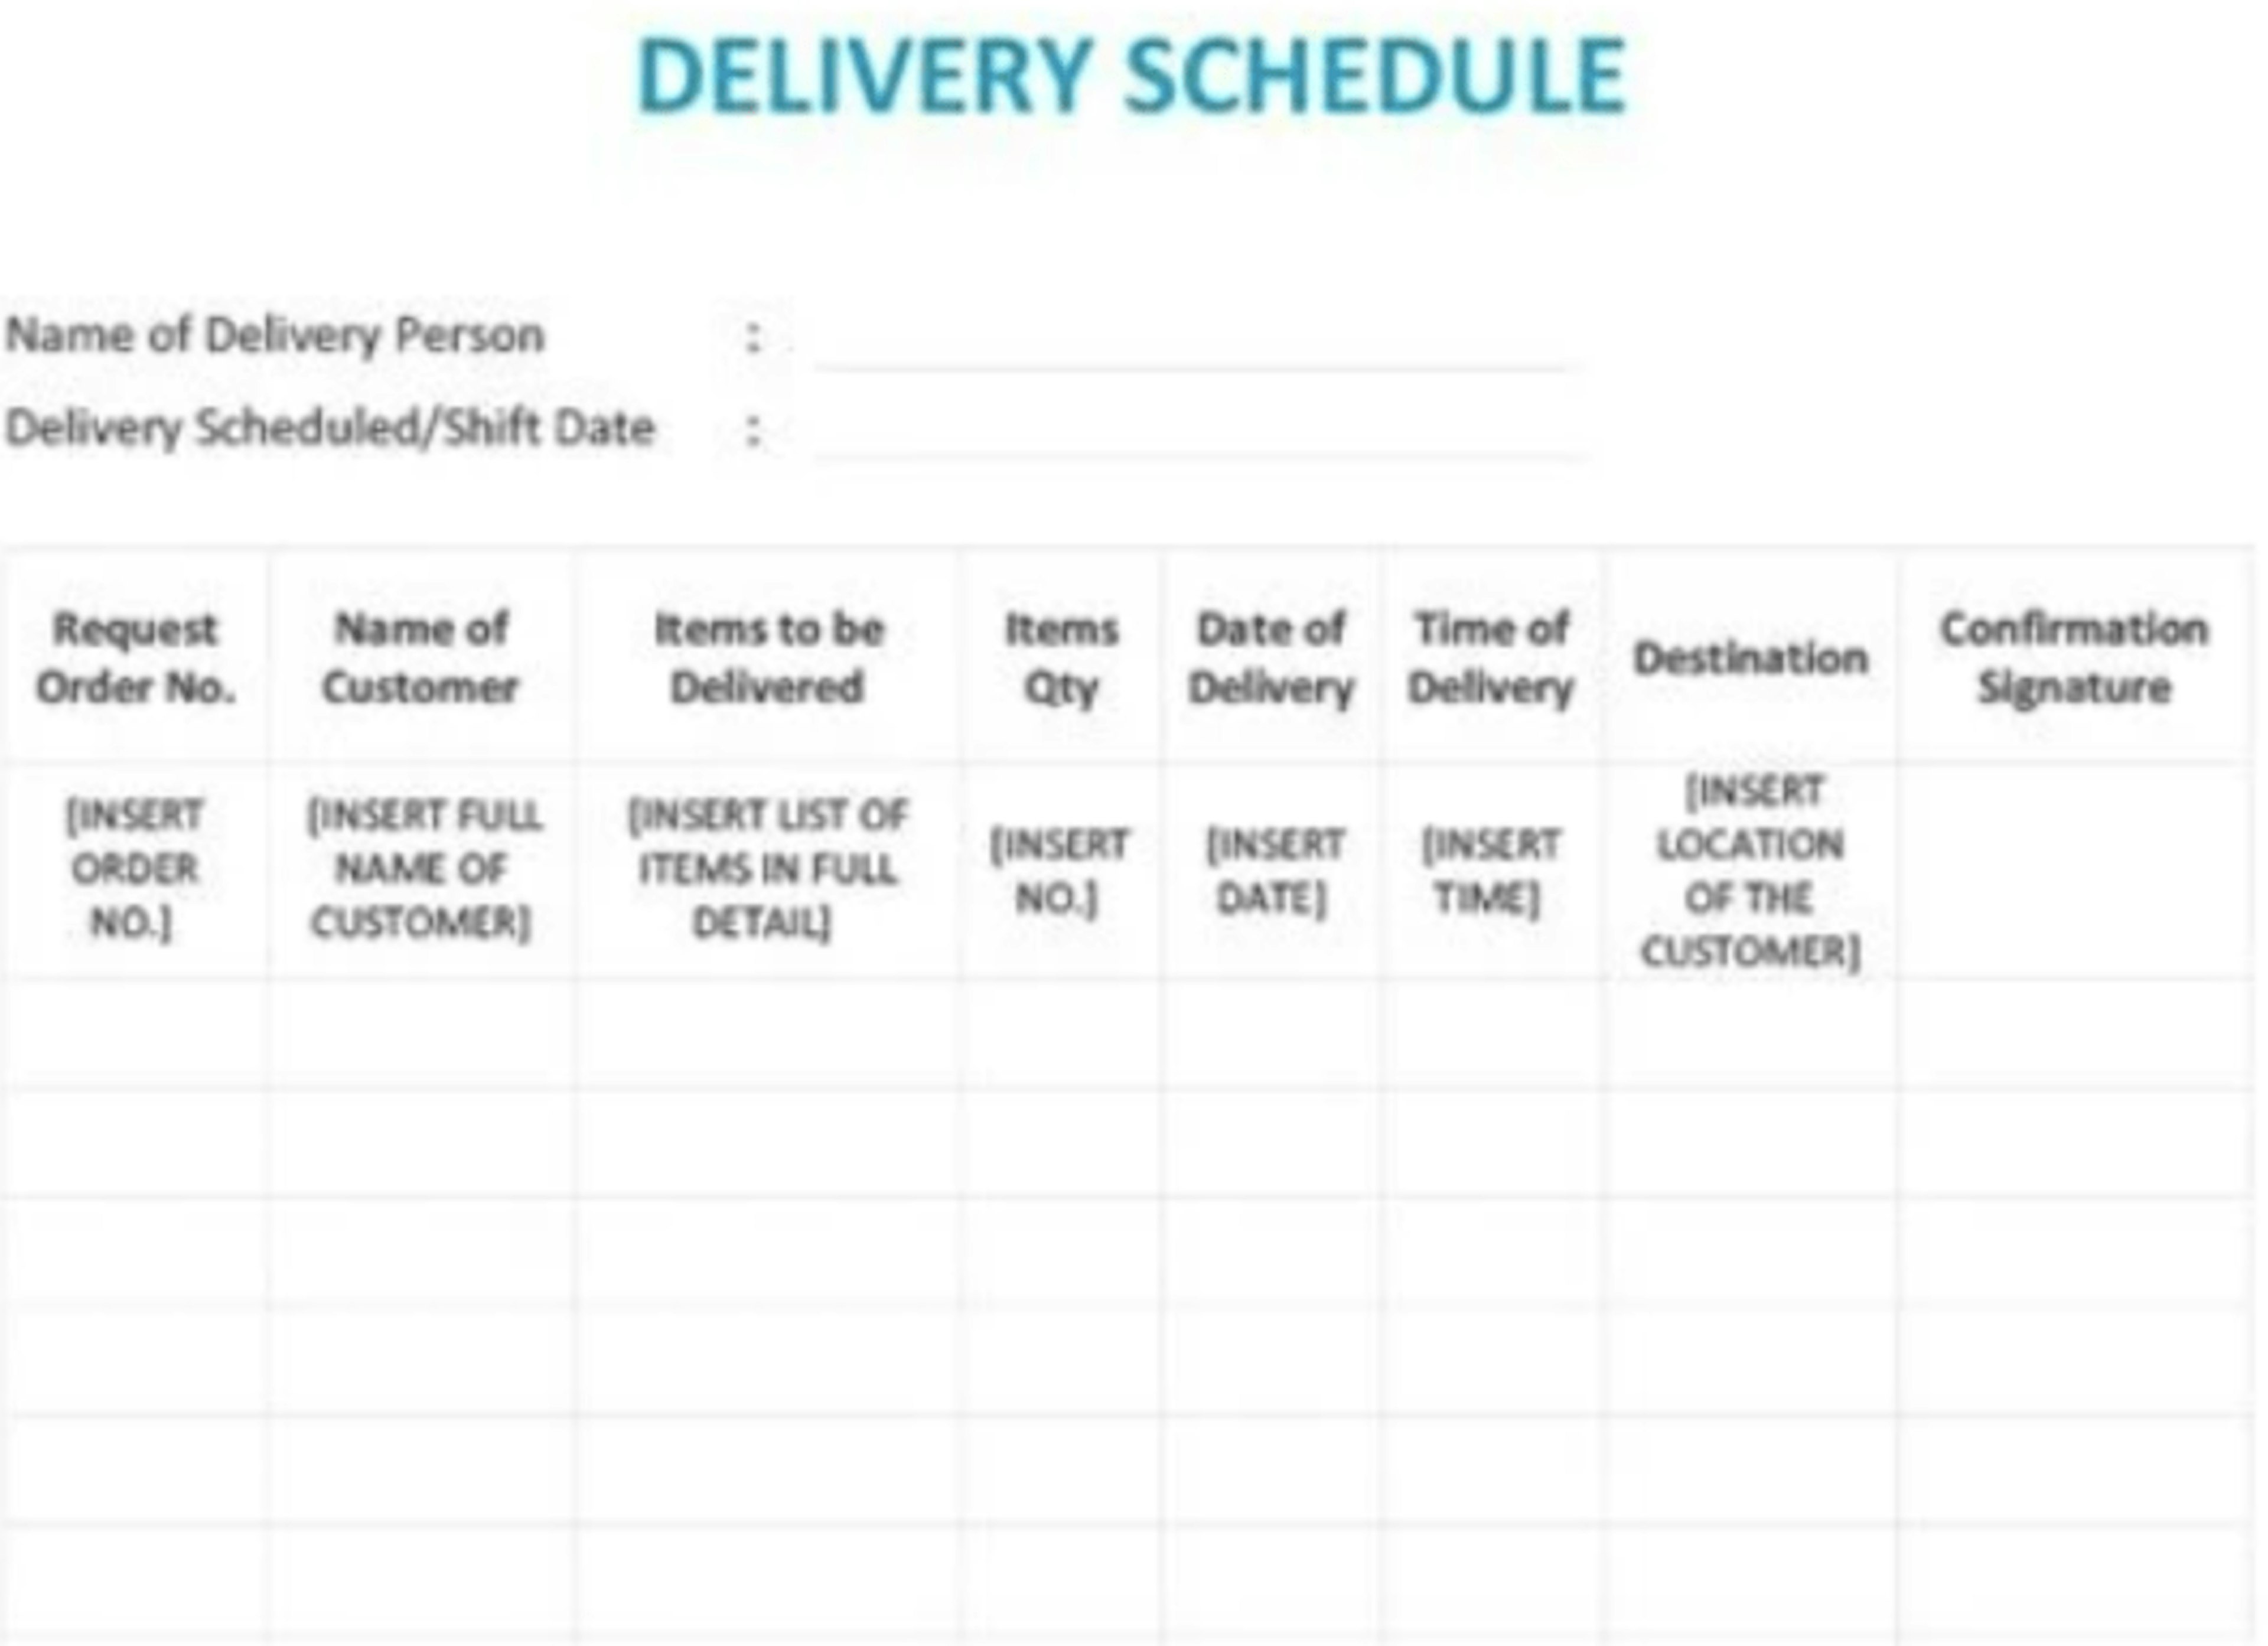 Delivery schedule template showing order details, customer names, delivery times, destinations and signature